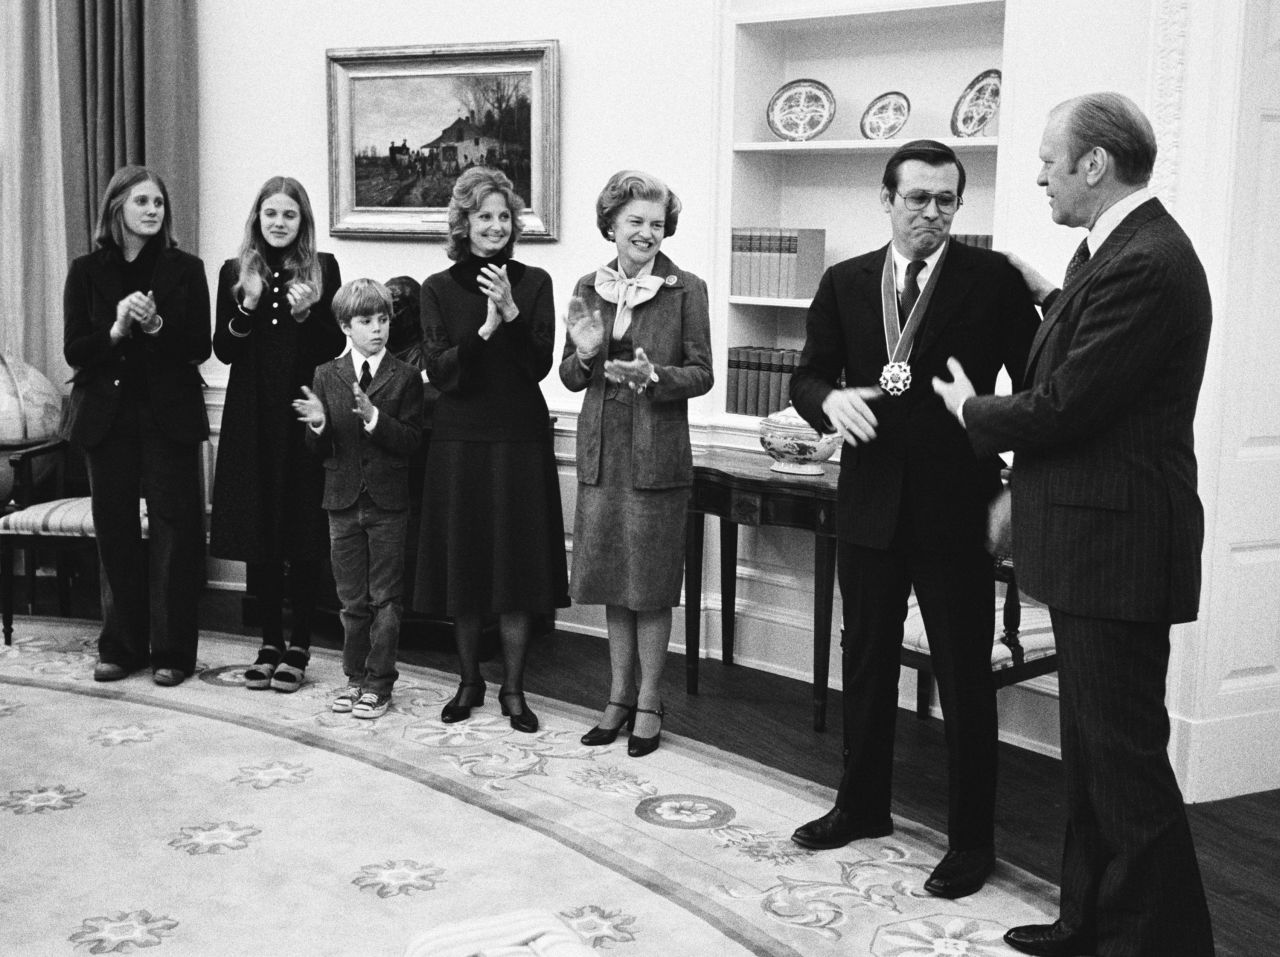 Rumsfeld receives the Presidential Medal of Freedom from Ford in January 1976. Joining them, from left, are Rumsfeld's children, Valerie, Marcy, and Nick; his wife, Joyce; and first lady Betty Ford.